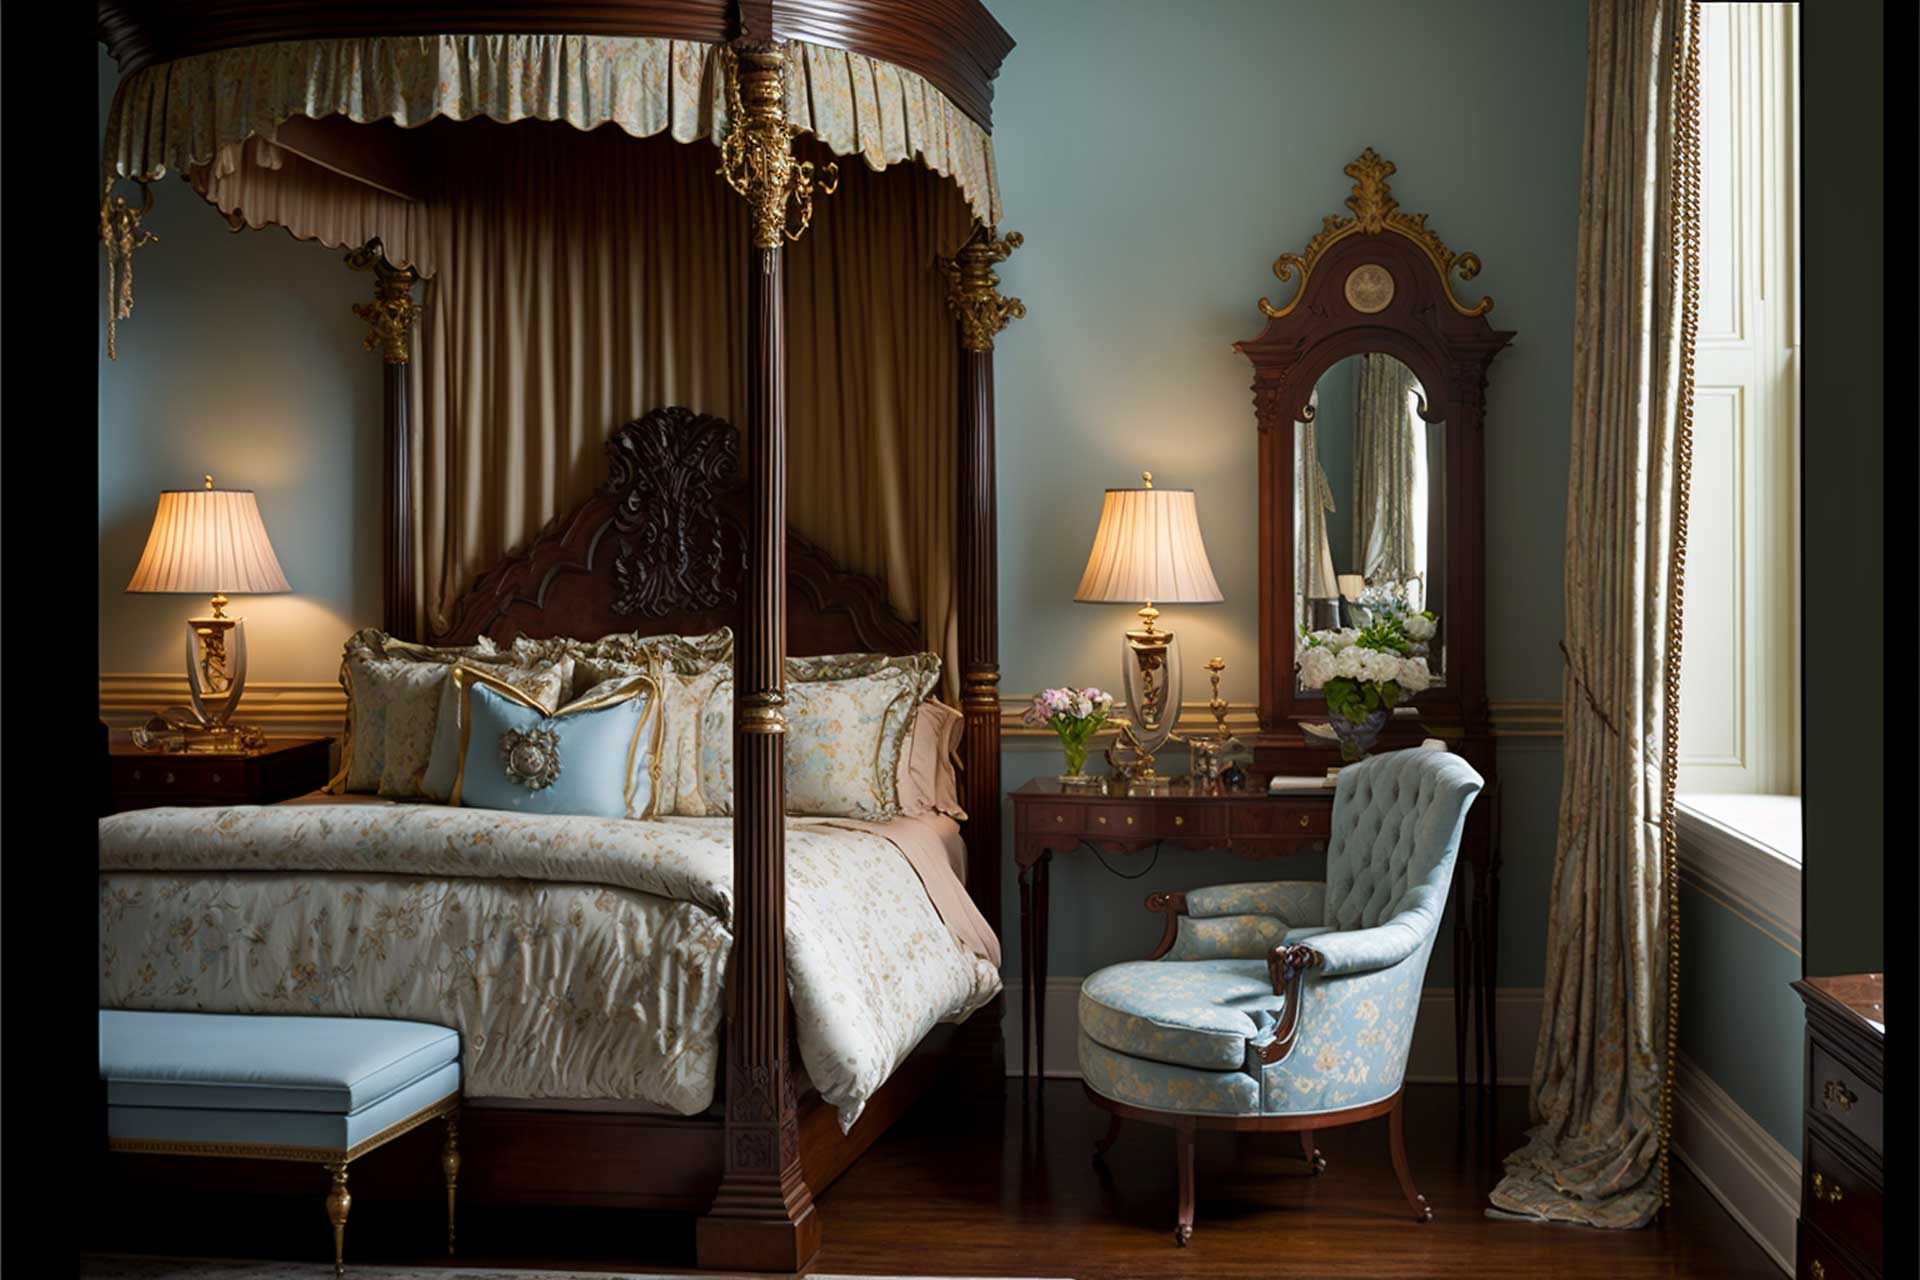 Grand Antique Armoire And Matching Furnishings In A Beautiful Bedroom